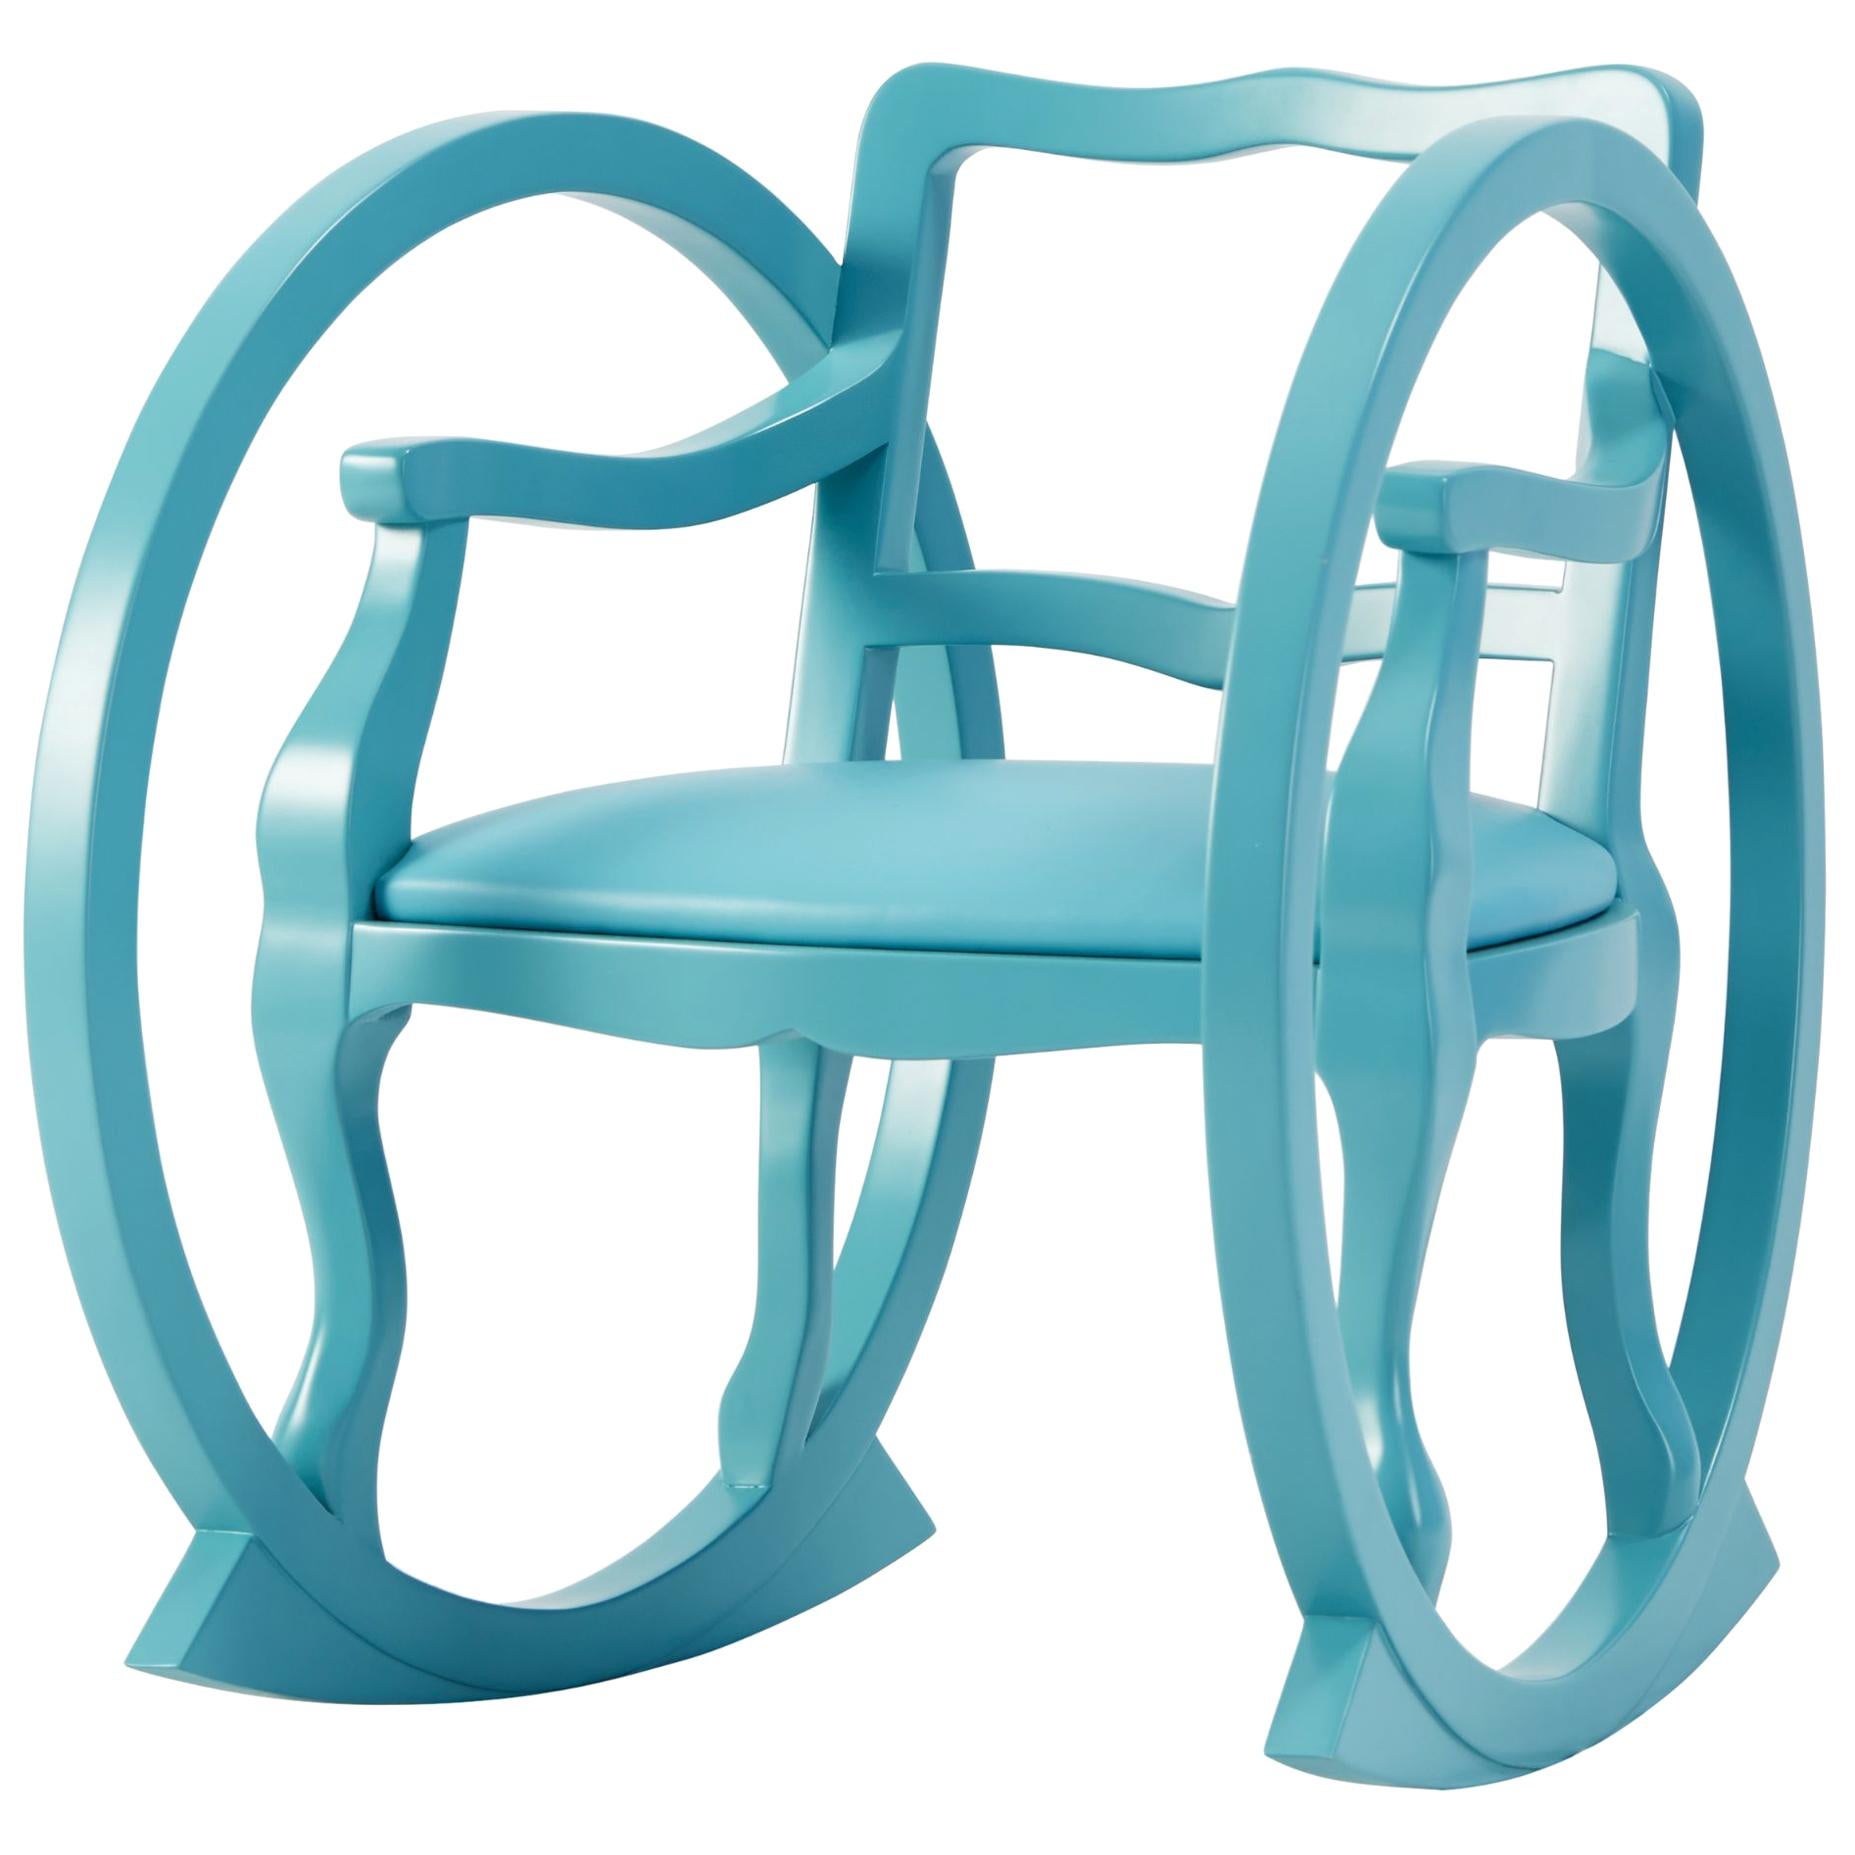 Kids Contemporary Rocking Chair Designed by Thomas Dariel